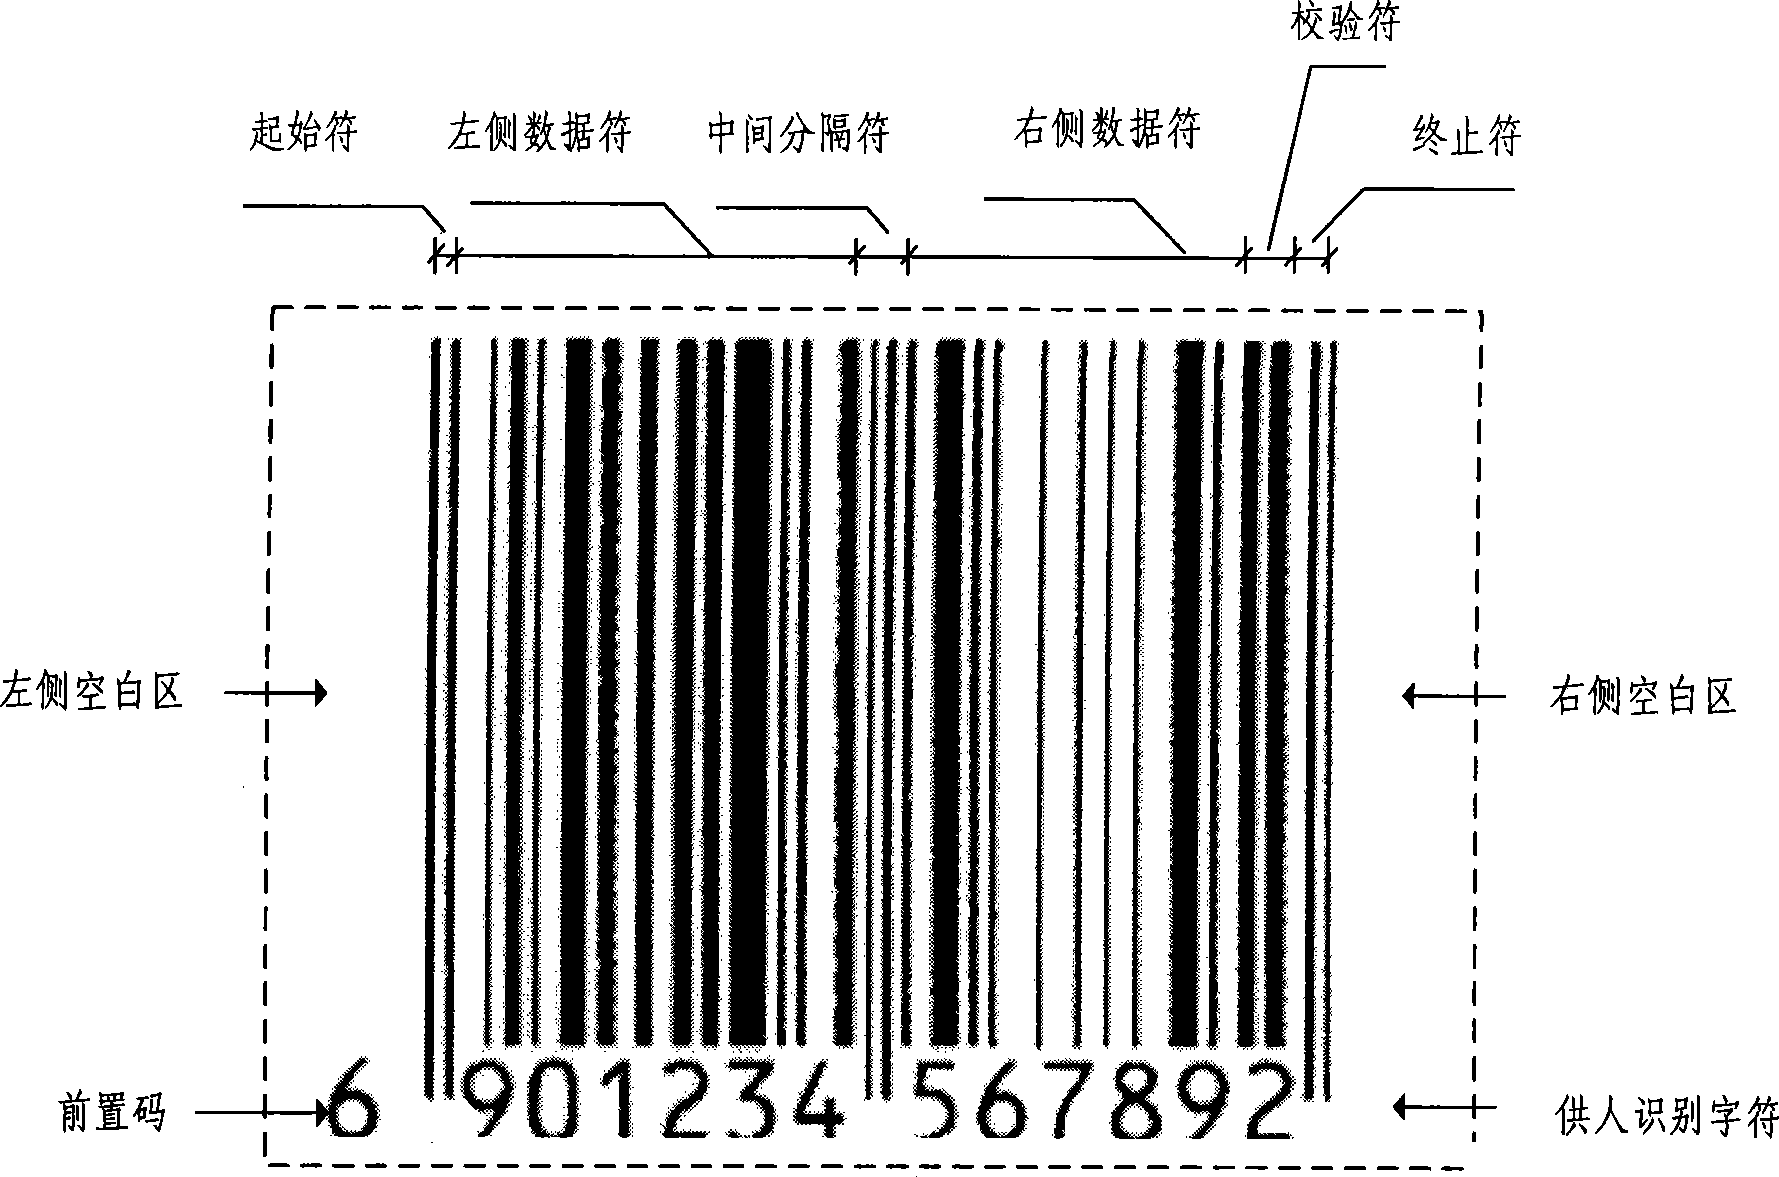 Method for determining uniqueness of electronic documents by using electronic barcode